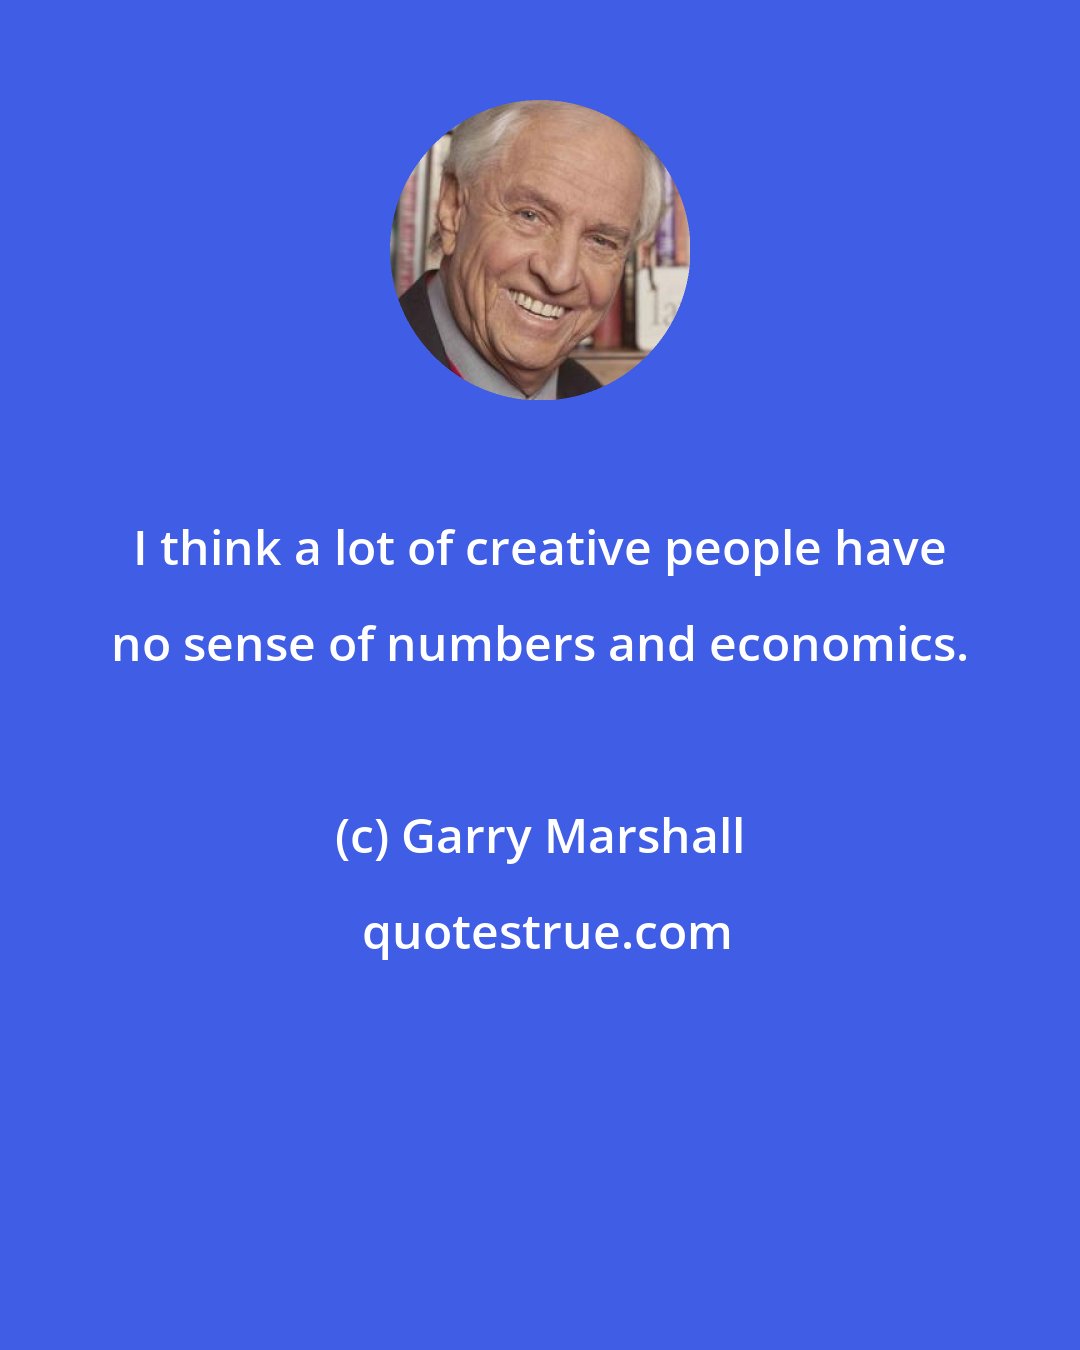 Garry Marshall: I think a lot of creative people have no sense of numbers and economics.